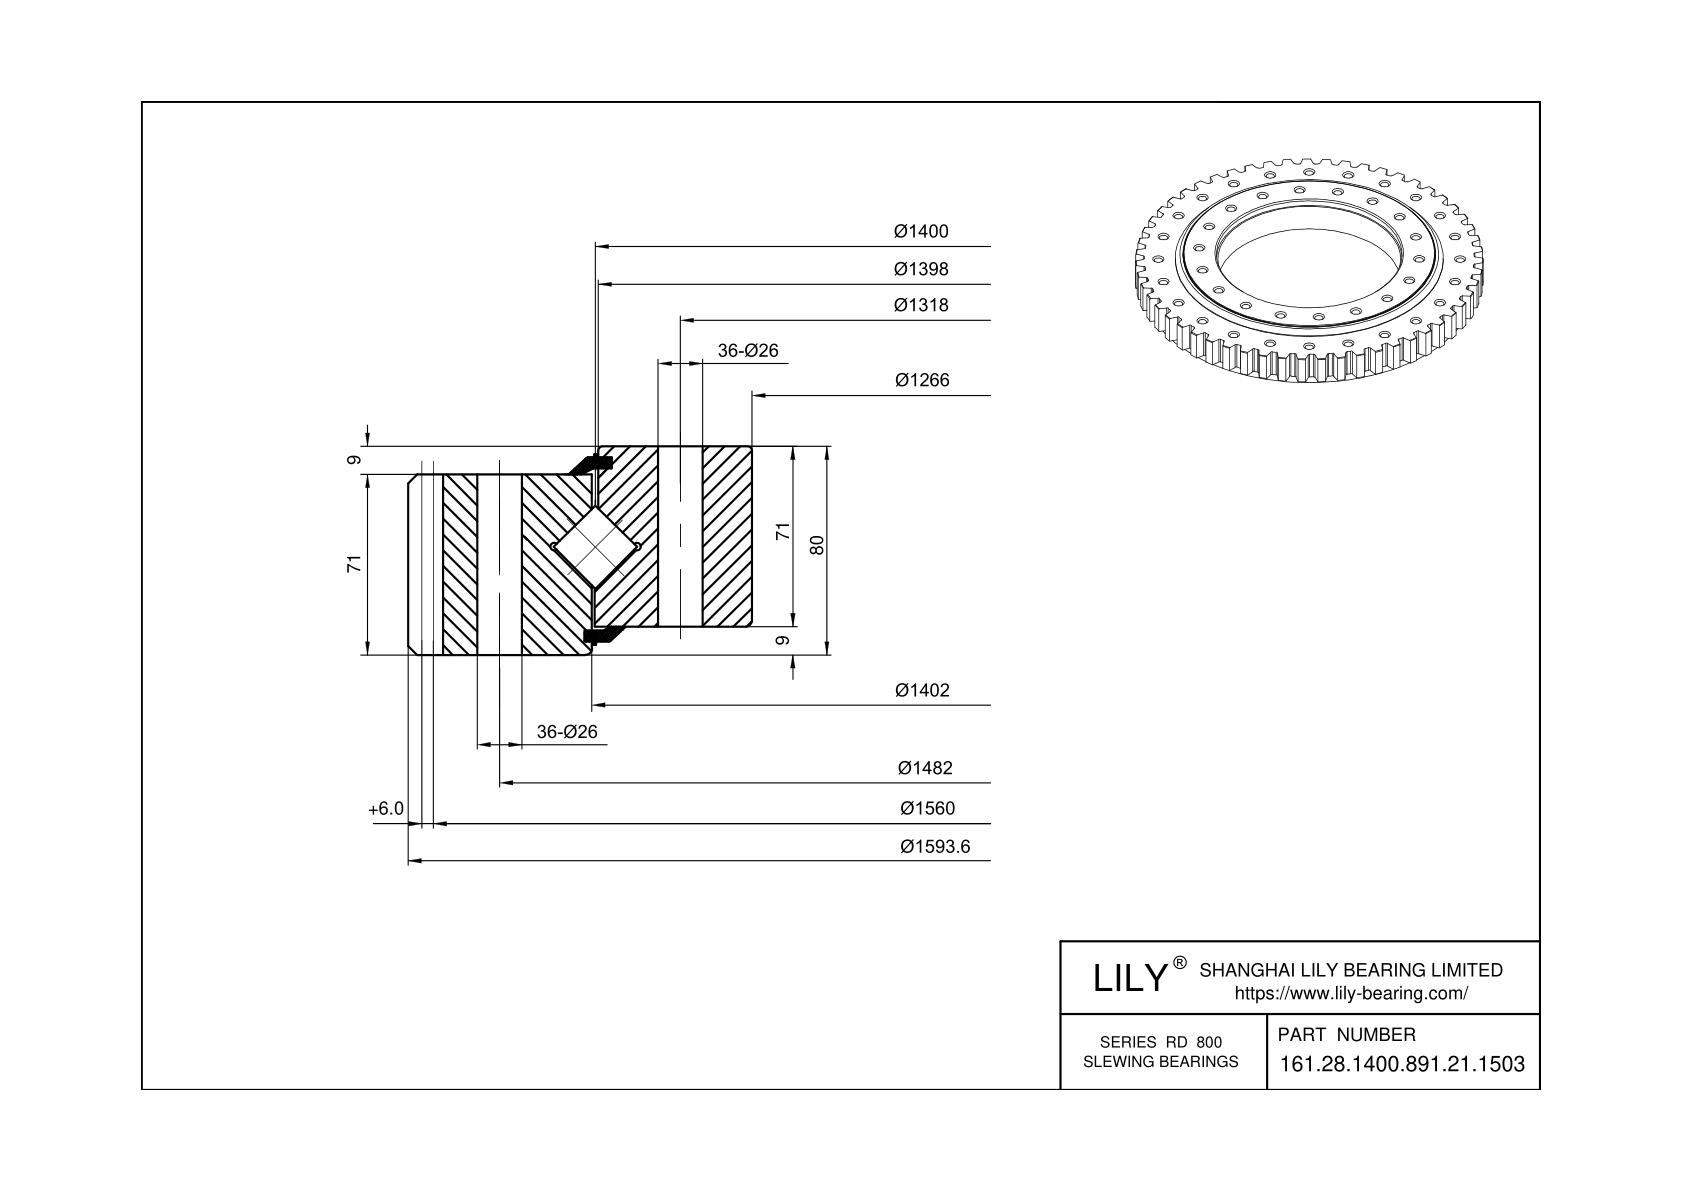 161.28.1400.891.21.1503 Cross Roller Slewing Ring Bearing cad drawing